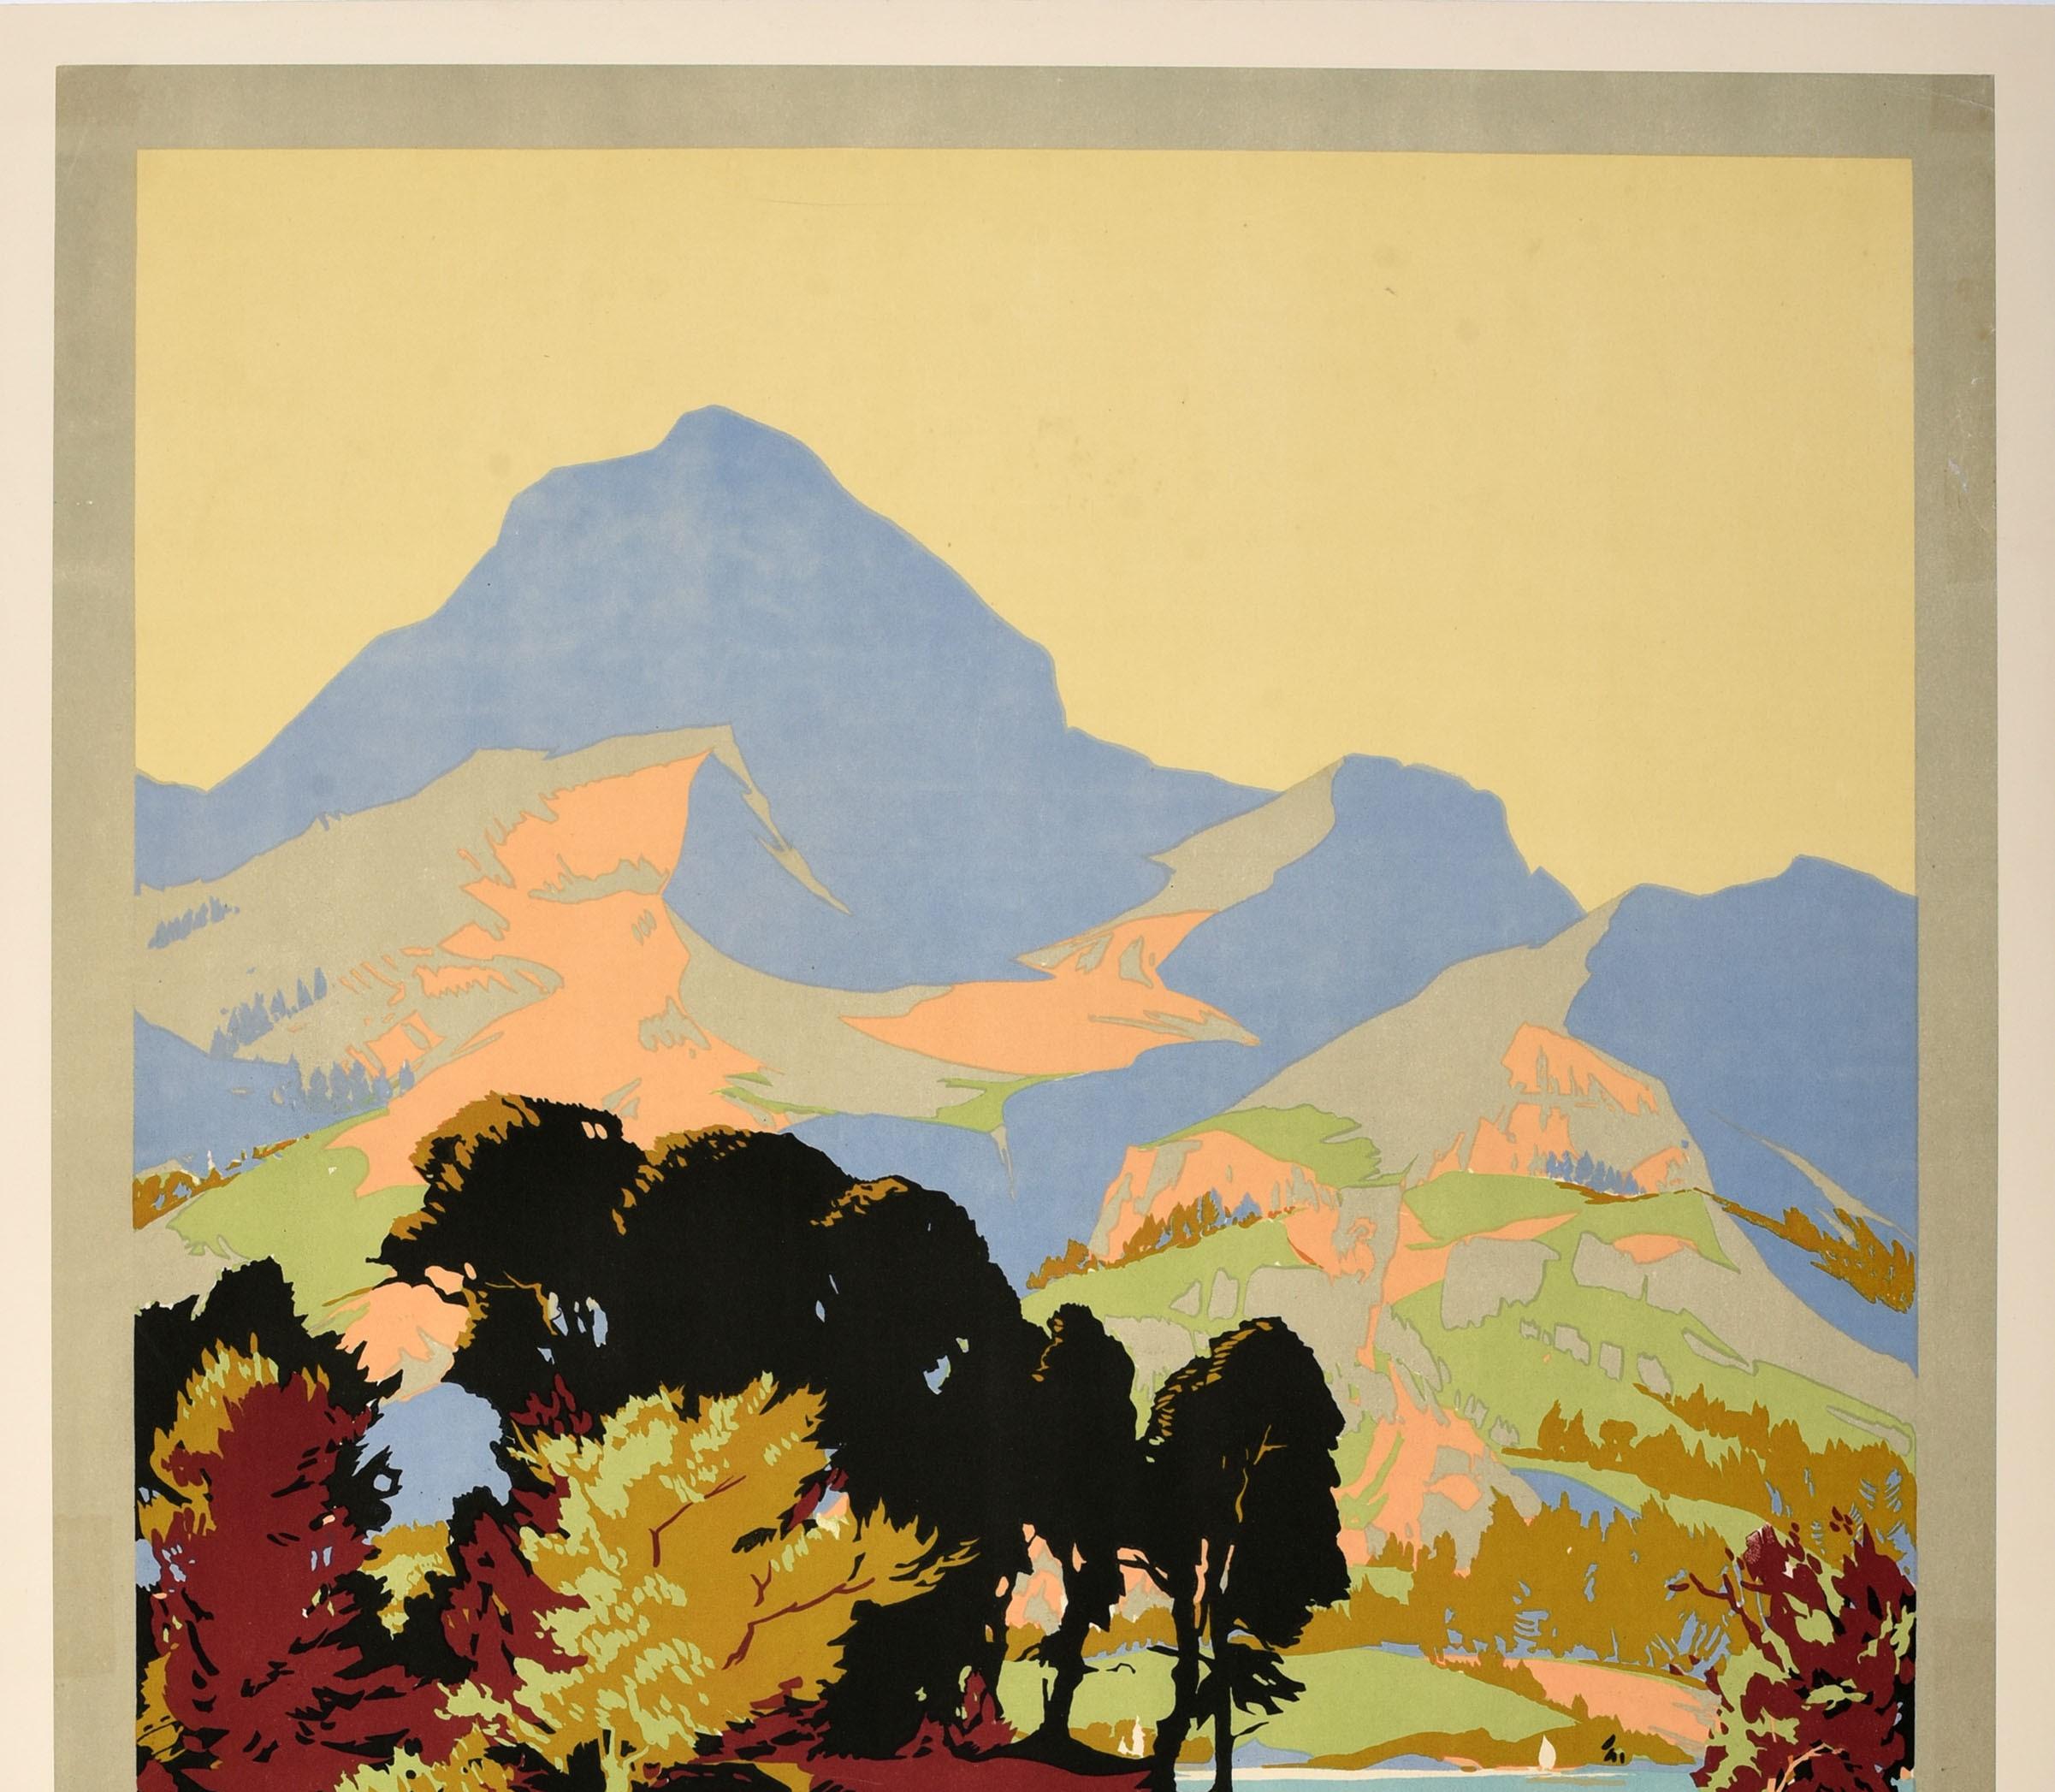 Original vintage LMS train travel poster issued by the London Midland and Scottish Railway - The Lake District For Holidays - featuring scenic artwork by the British painter John Edmund Mace (1889-1952) showing two people relaxing and enjoying the